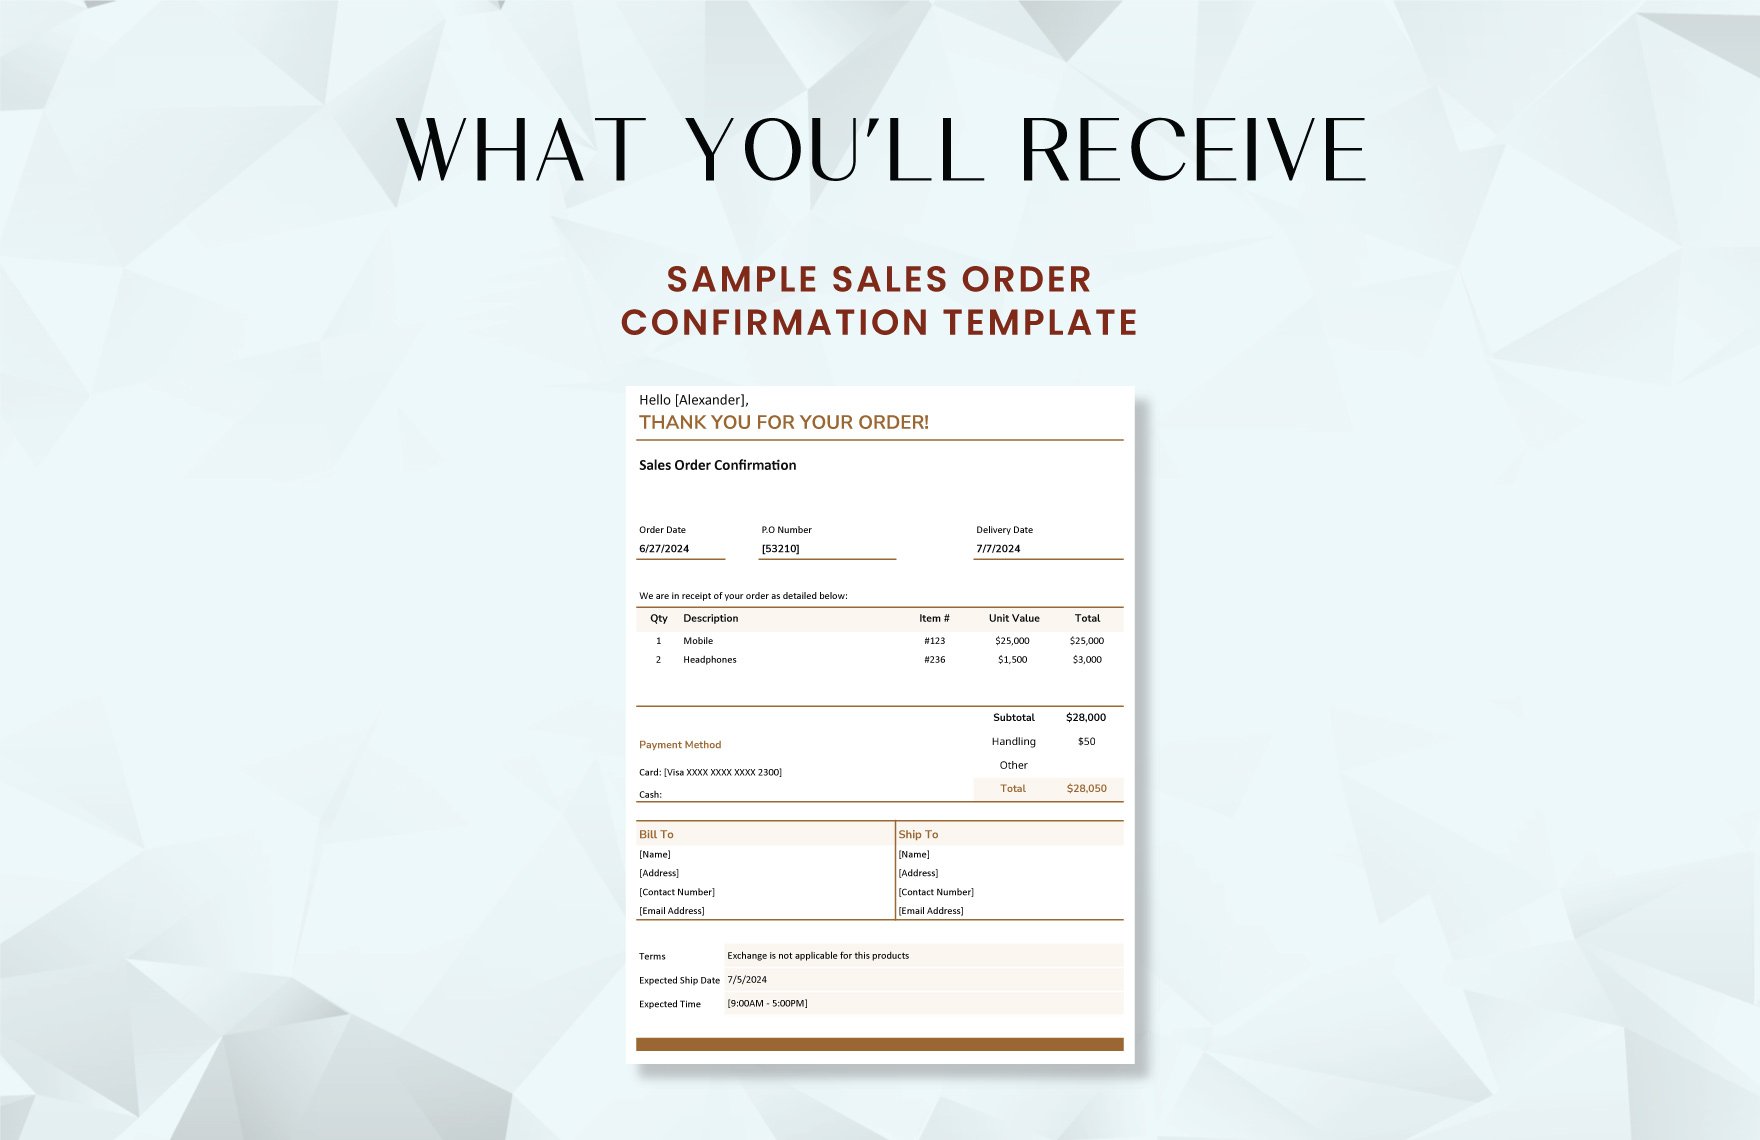 Sample Sales Order Confirmation Template